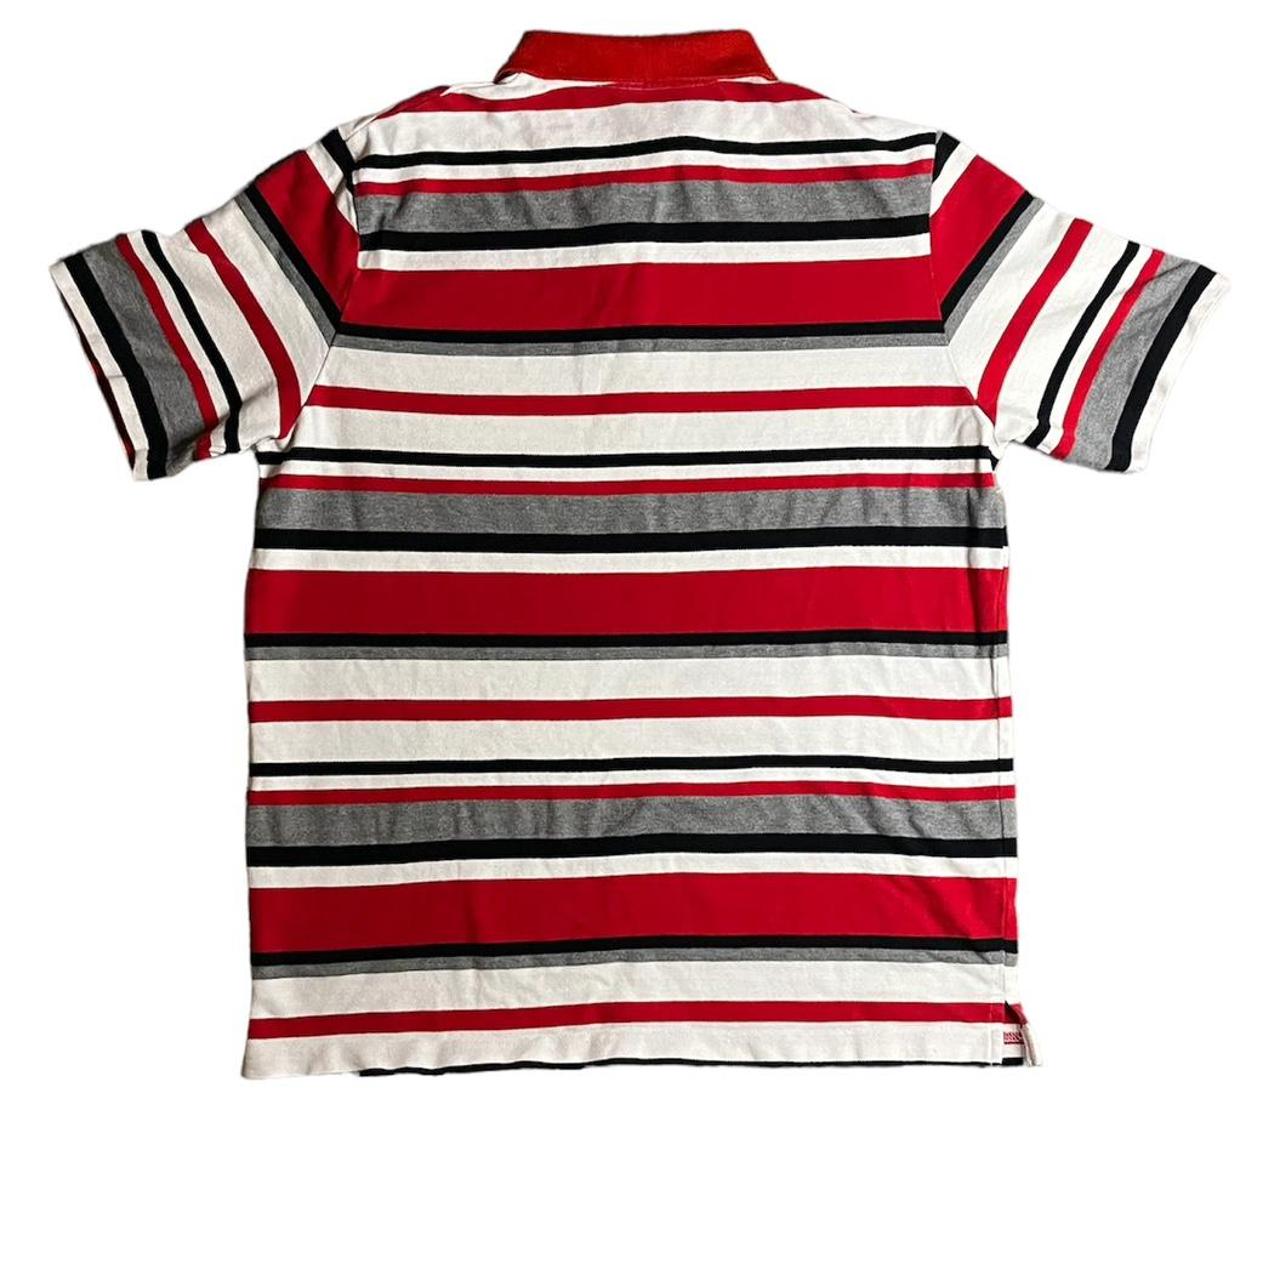 Men's Black and Red Polo-shirts (2)